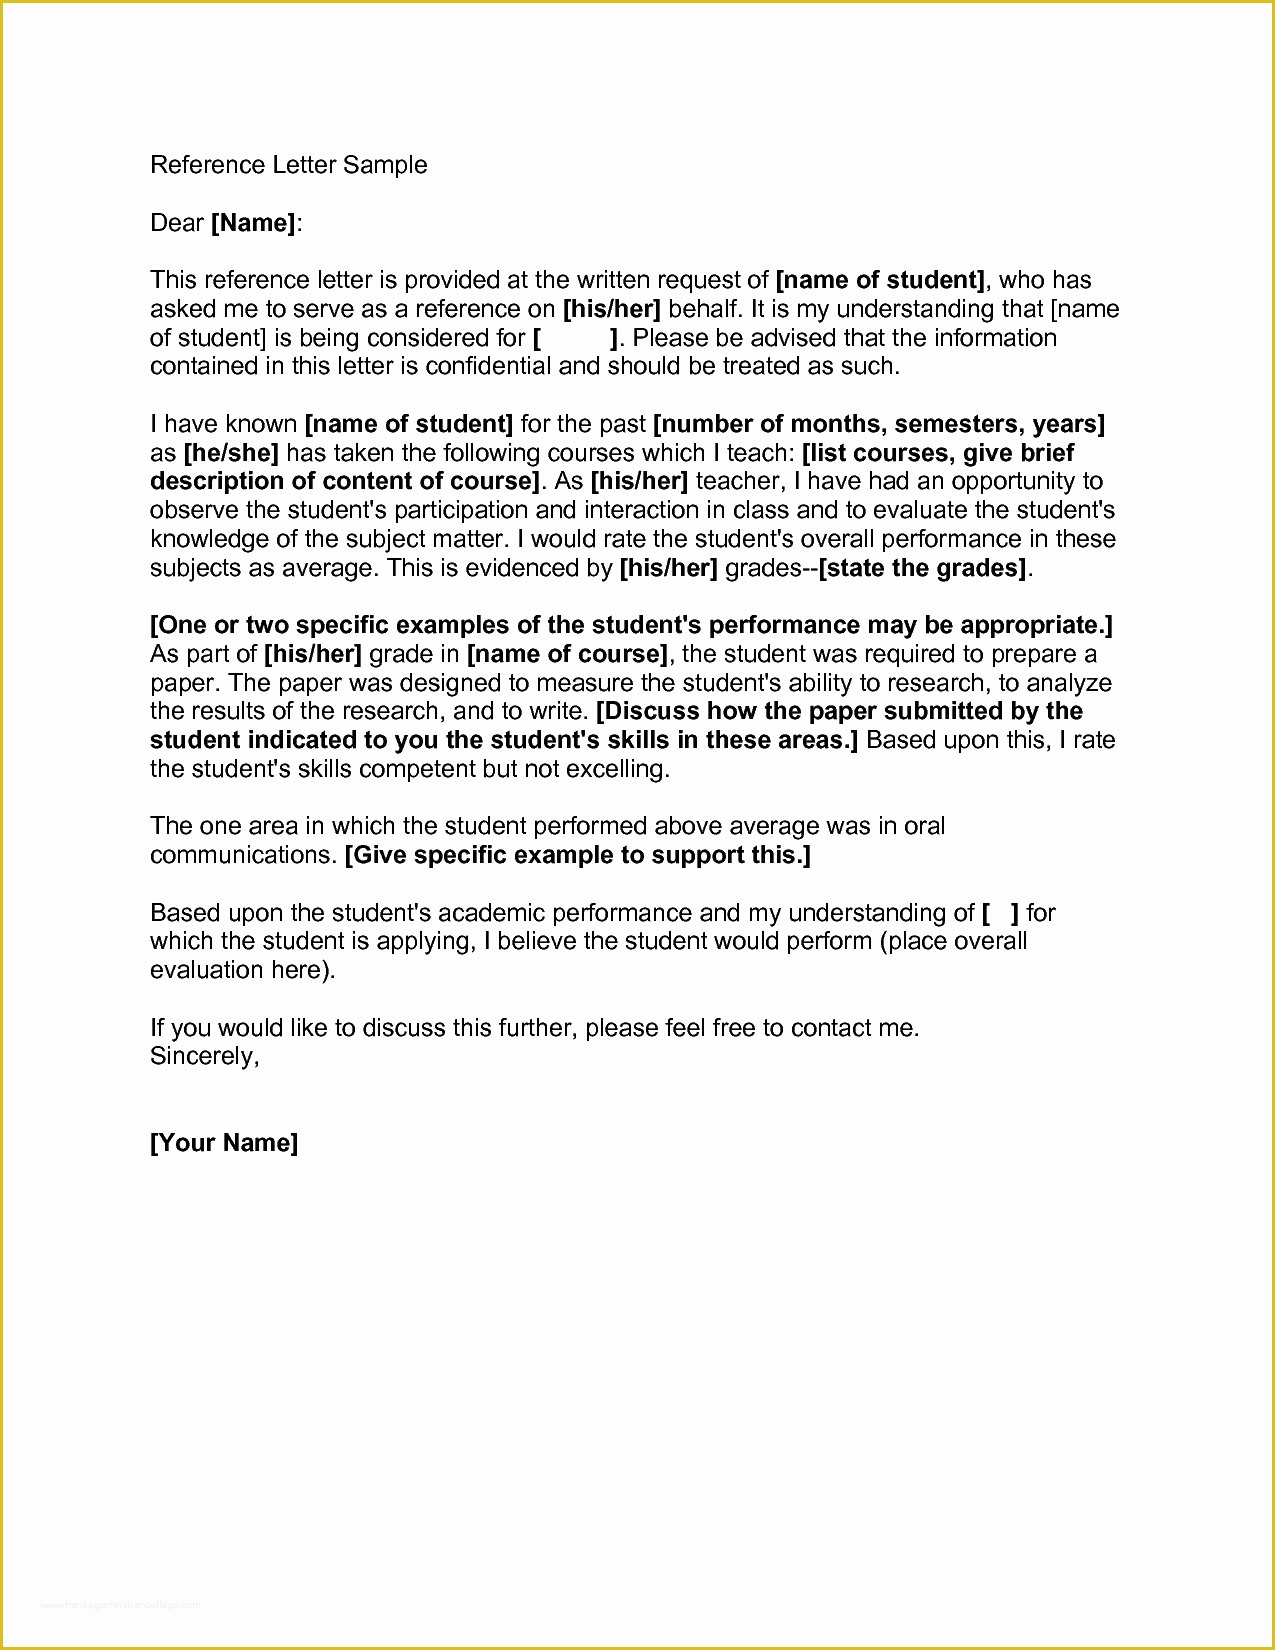 Reference Letter Template Free Of Reference Letter Samplesexamples Of Reference Letters